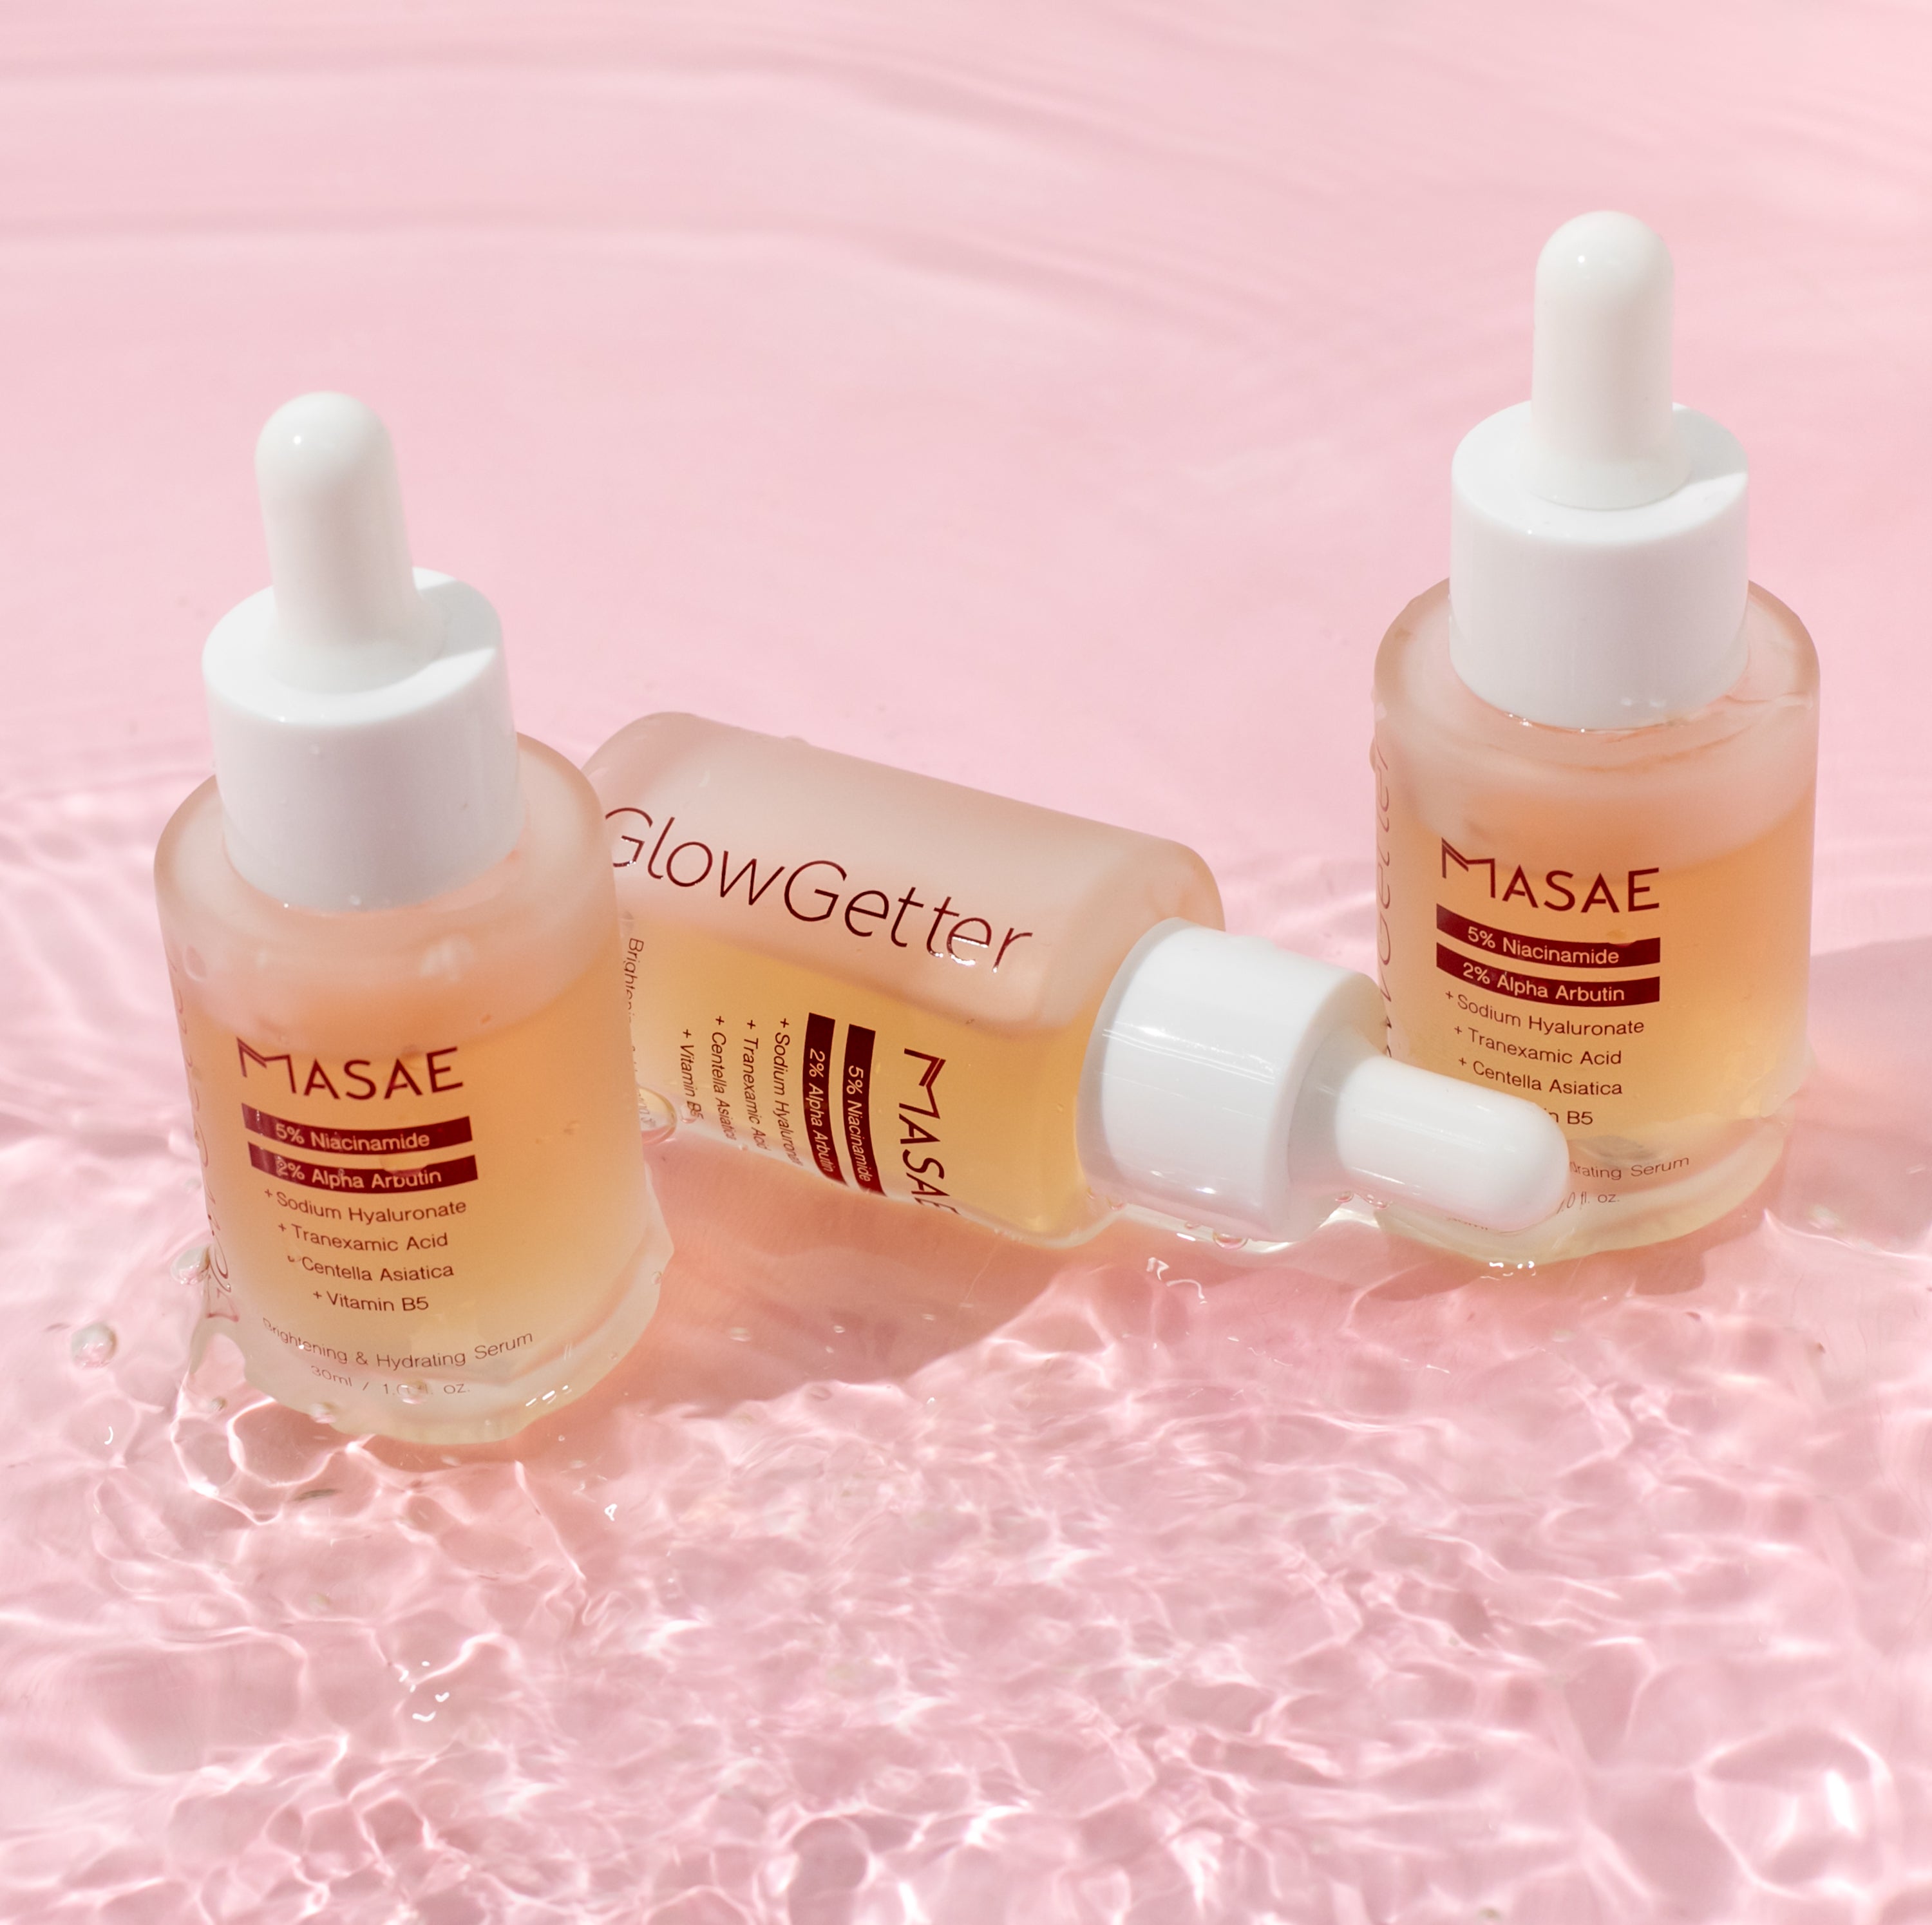 MASAE's Glow Getter Hydrating Face Serum on Water